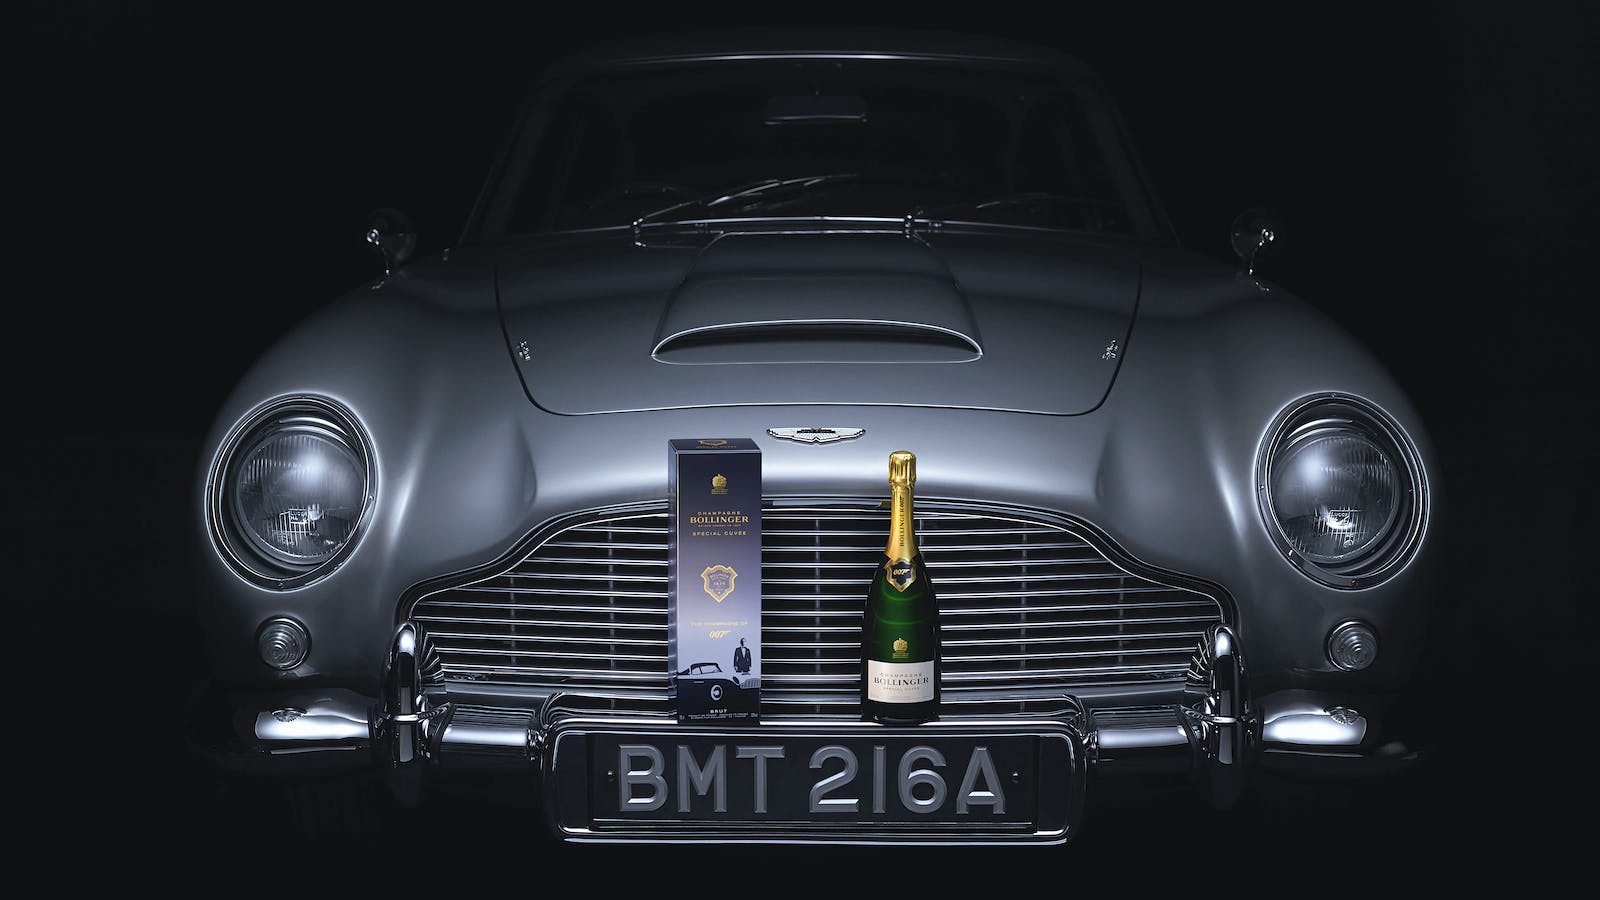 Bollinger's New 007 Champagne Honors Bond Film 'No Time to Die'